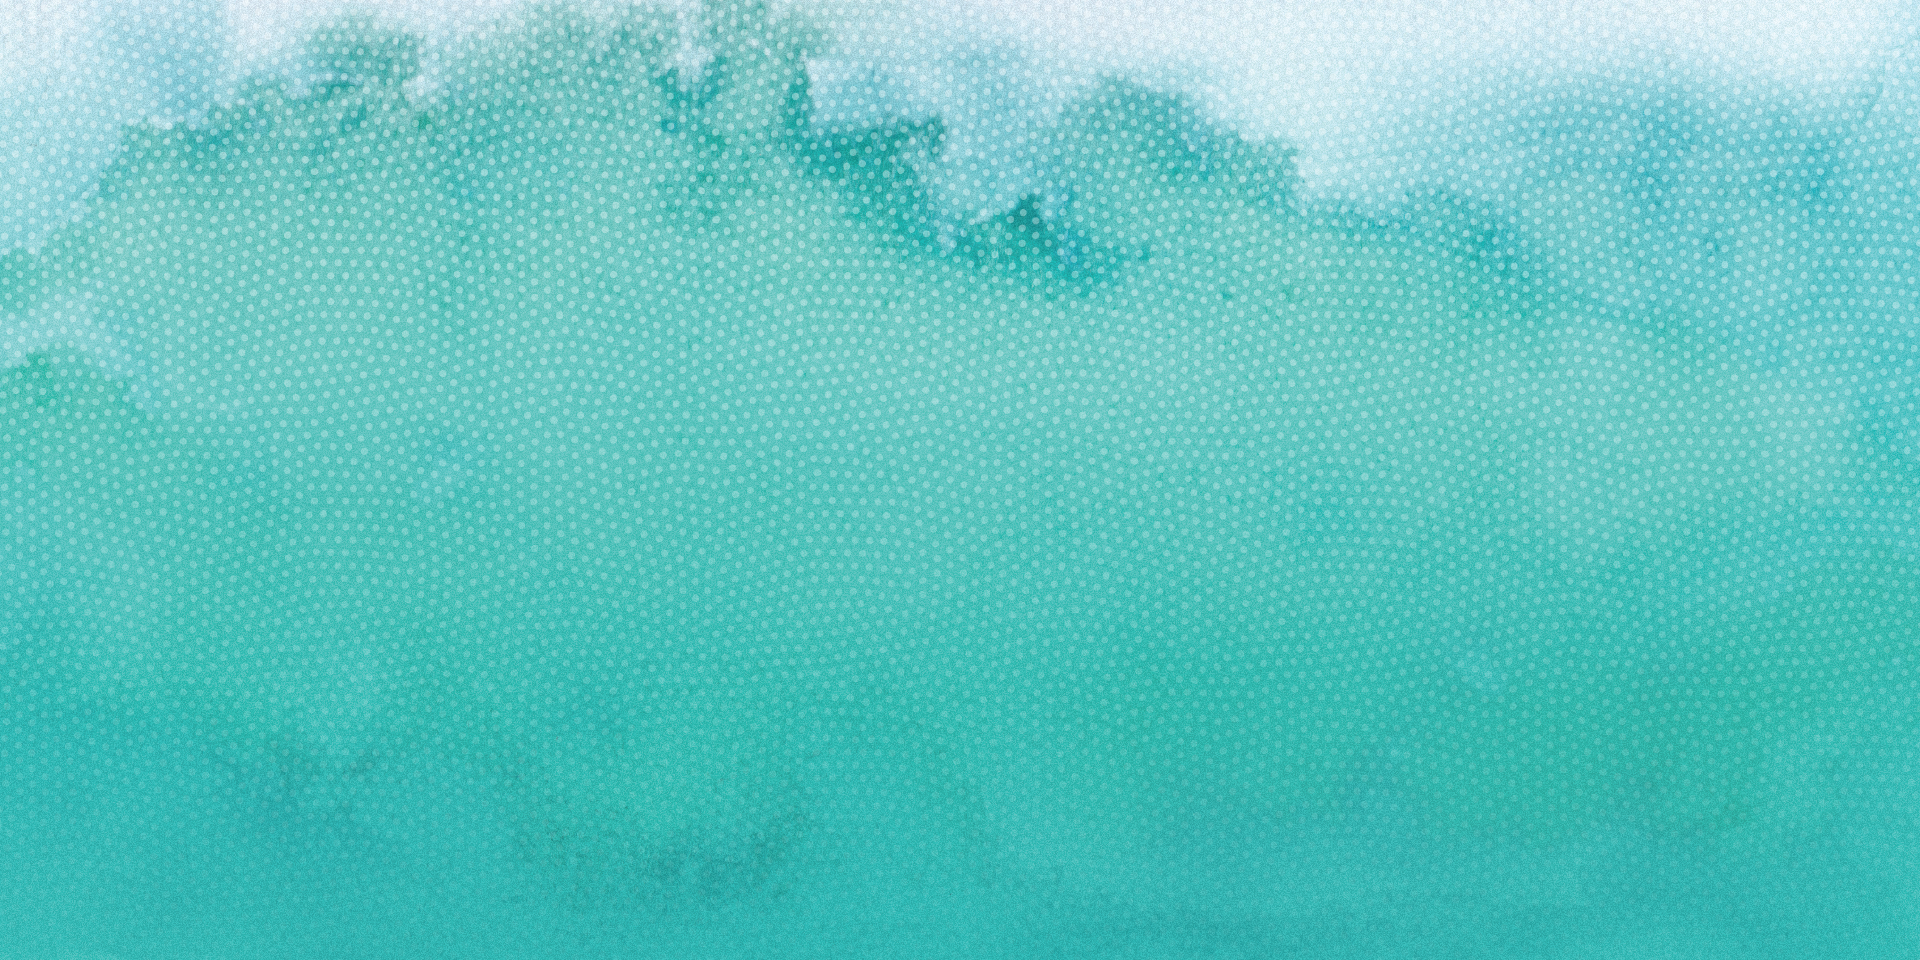 A teal watercolor background.